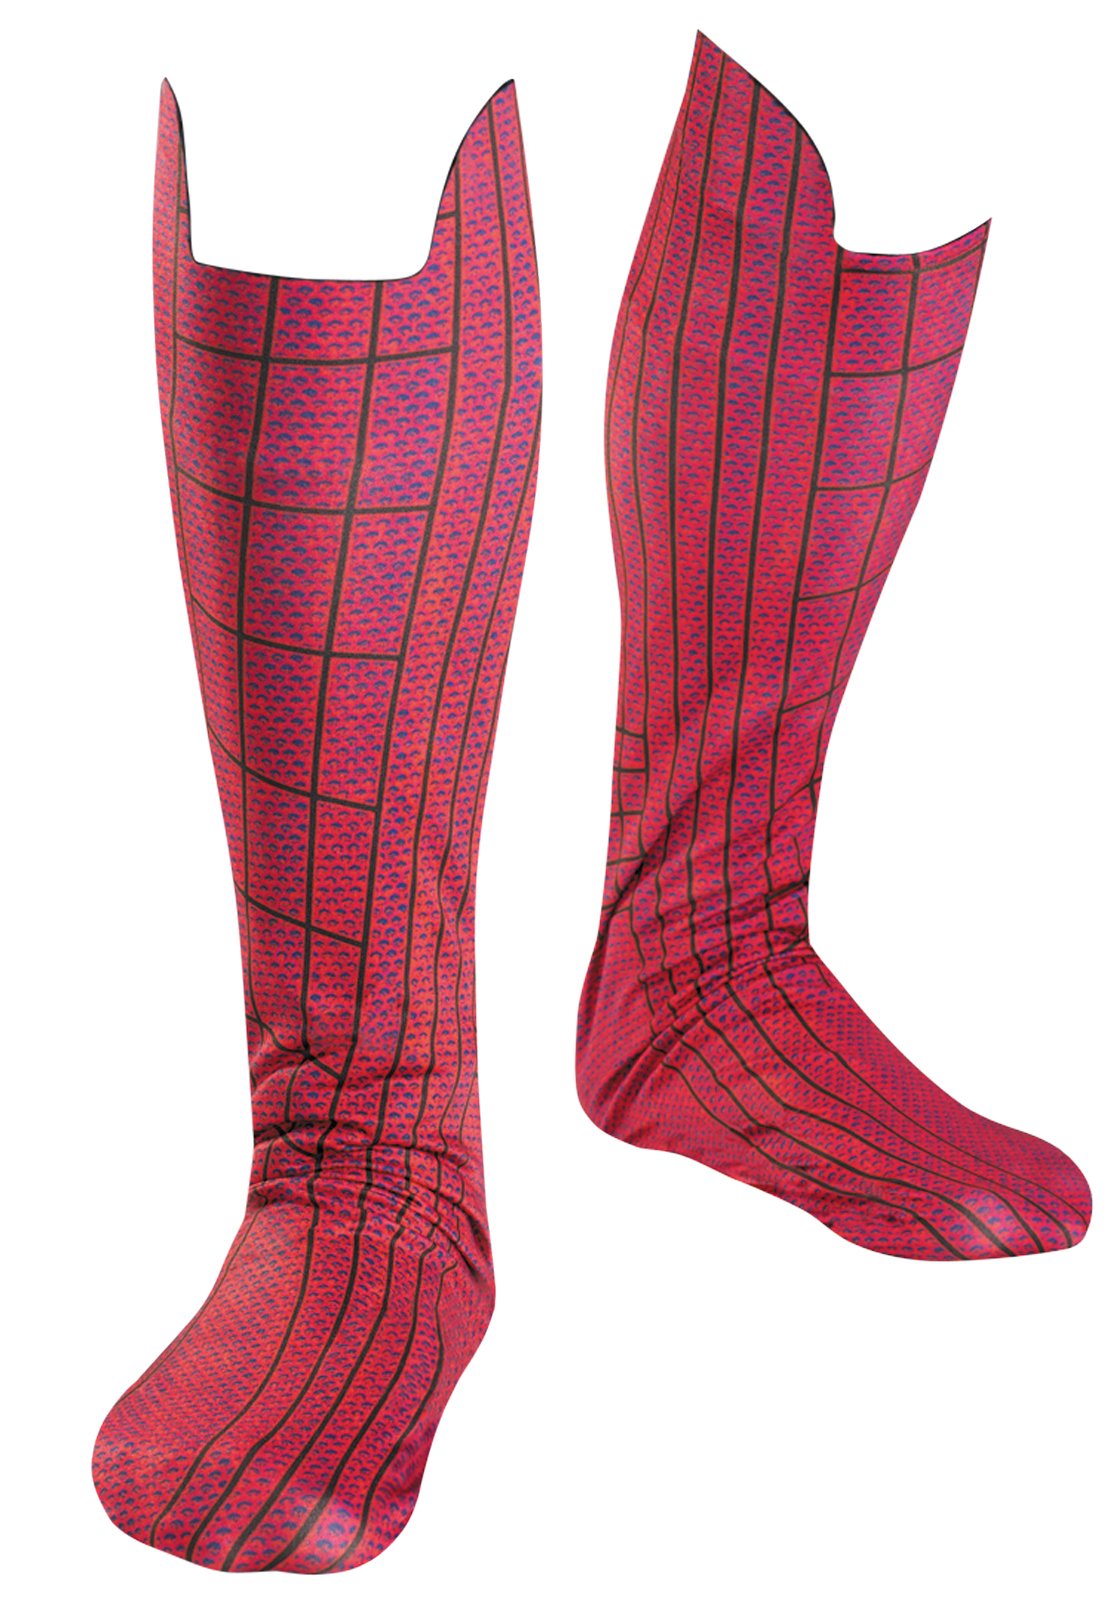 The Amazing Spider-Man Movie Boot Covers